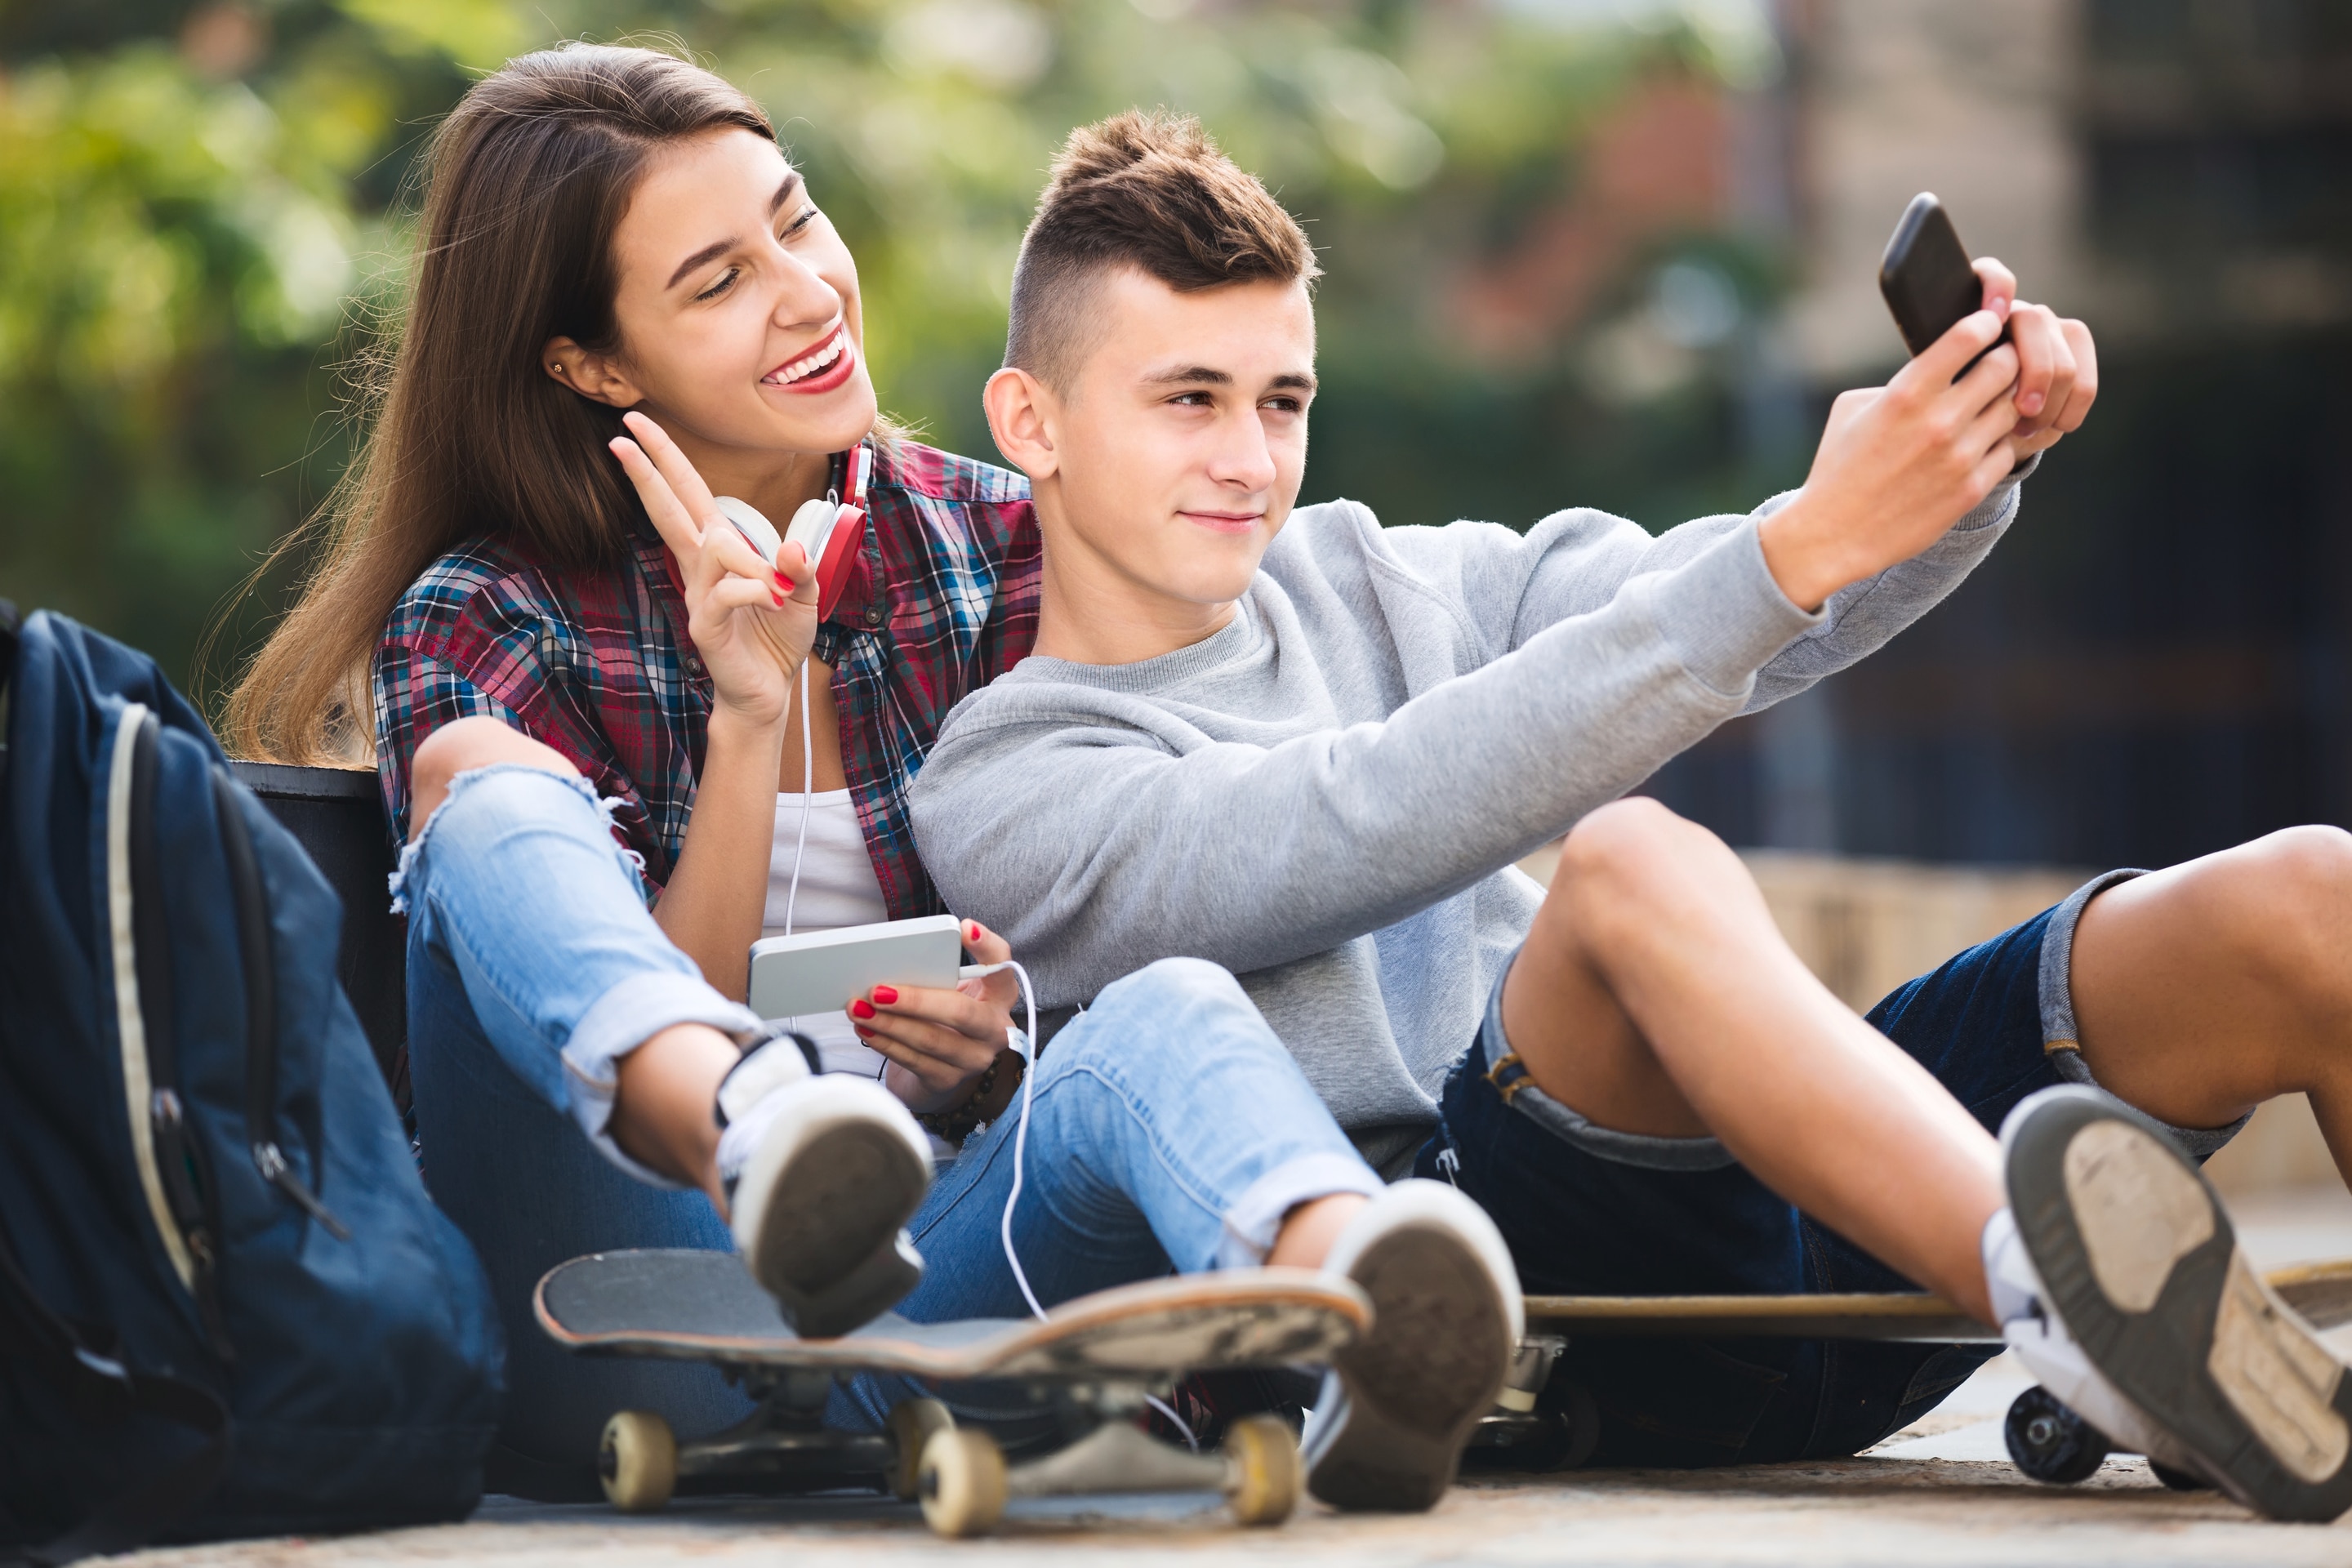 Girl and guy smiling and taking a selfie